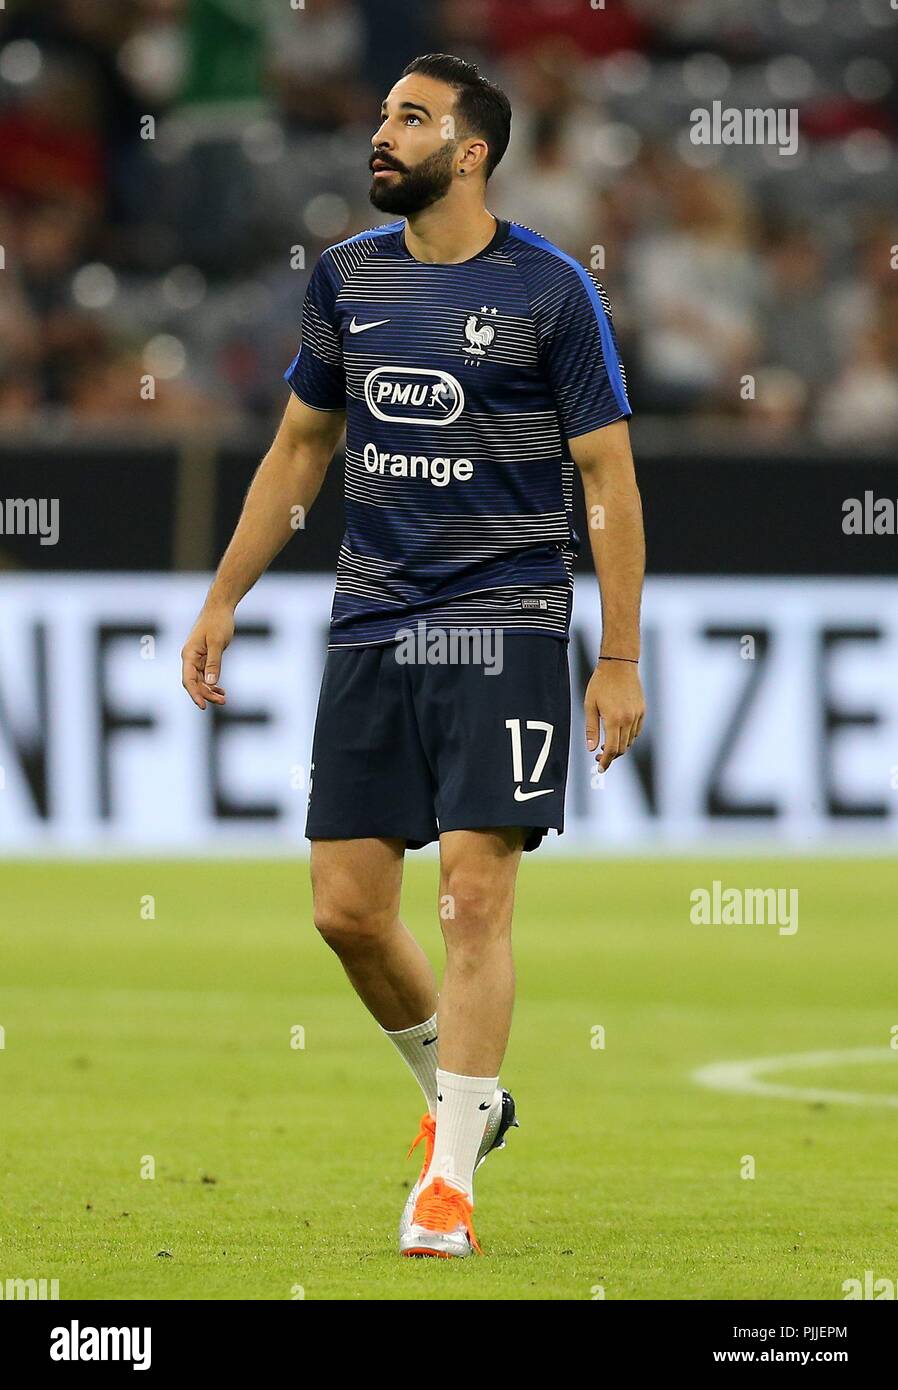 firo: 06.09.2018 Fuvuball, Football, National Team, Germany, UEFA, Nations League, Division A, League A, GER, Germany - FRA, France Adil Rami, France, FRA, Full Character, Single Action | usage worldwide Stock Photo